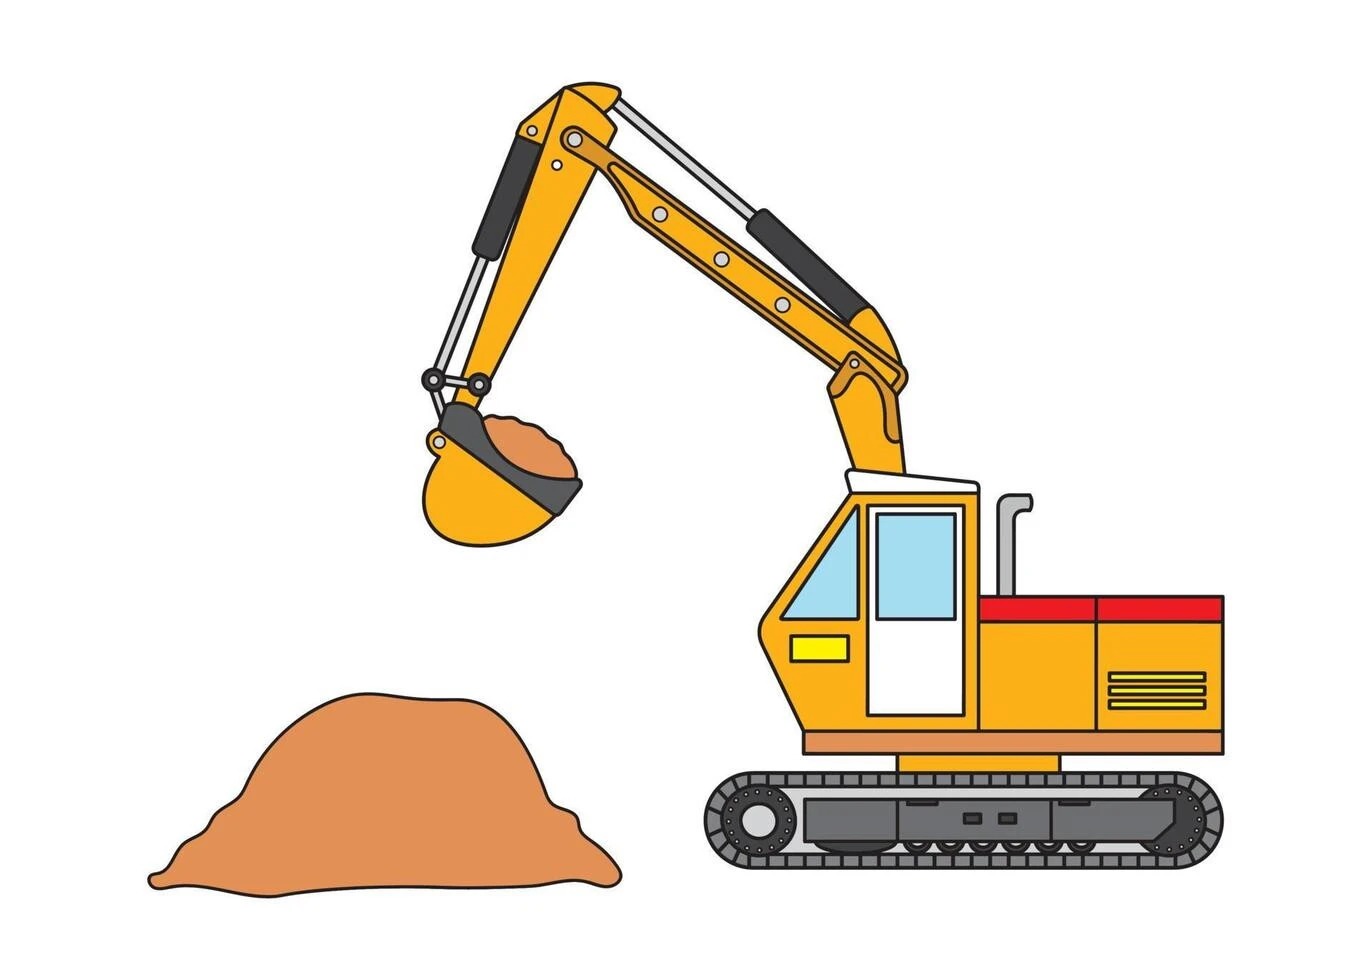 Causes and Solutions for Water Ingress in Mini Excavators